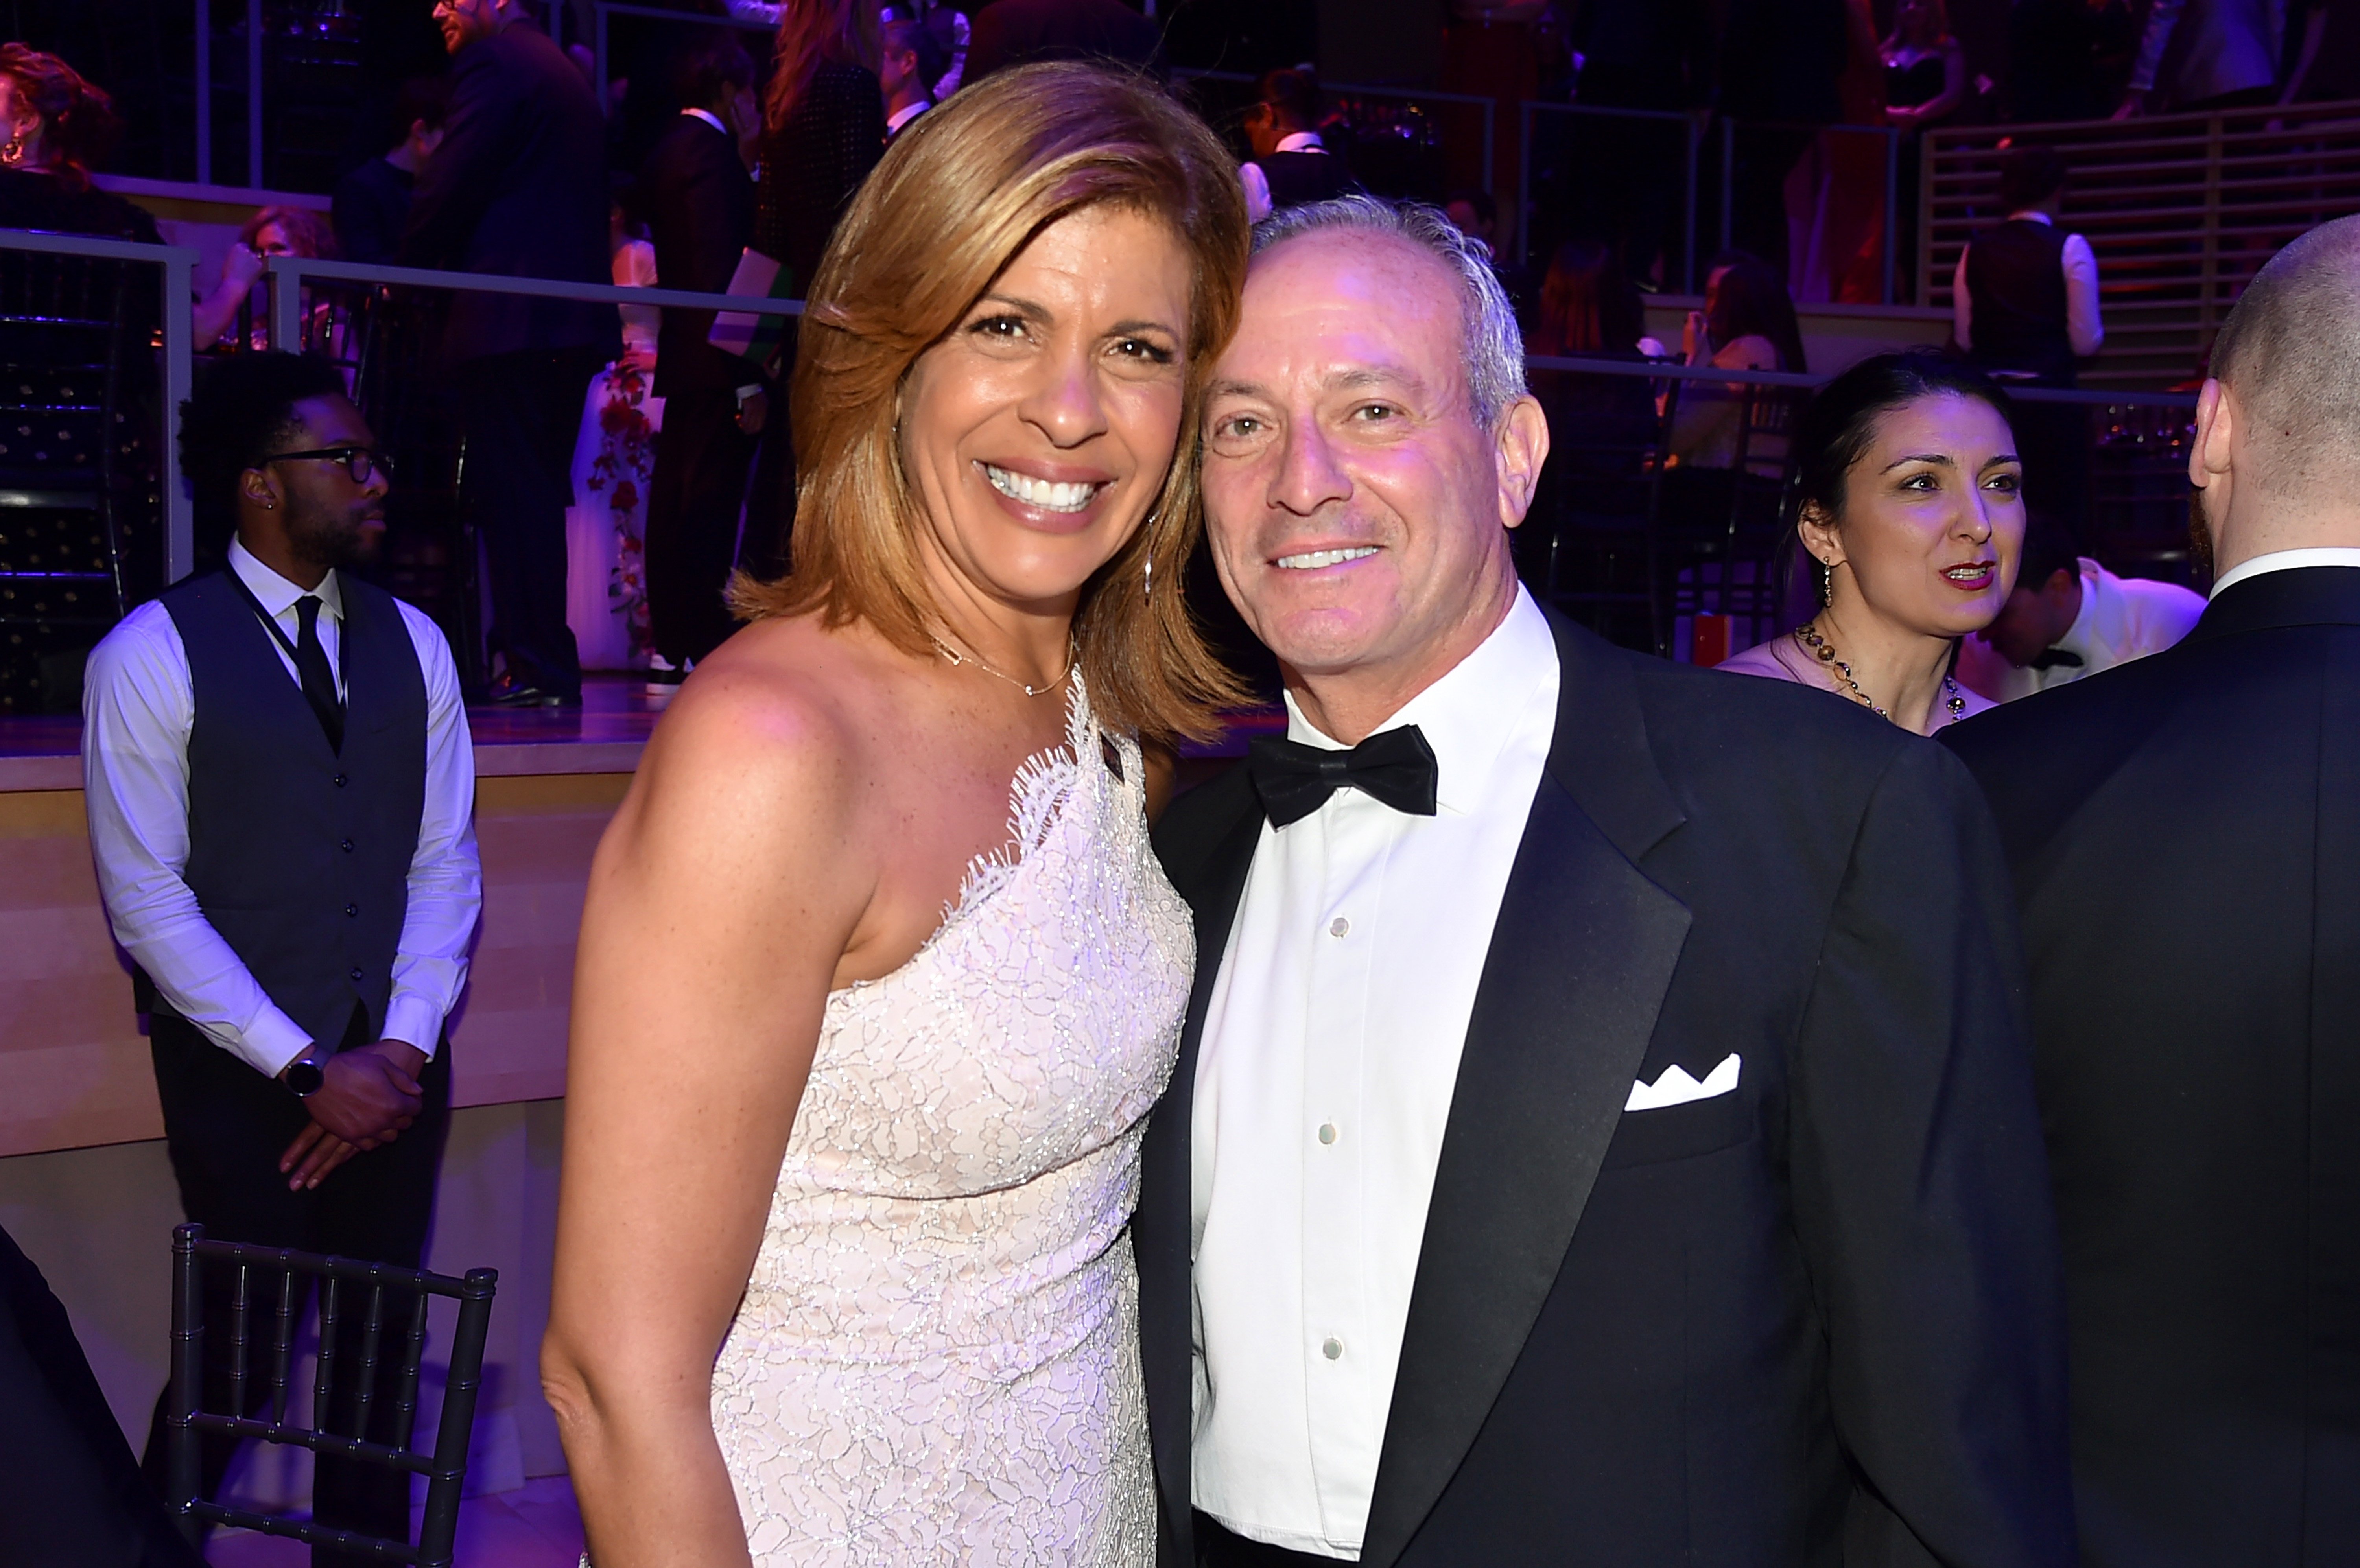 Hoda Kotb and Joel Schiffman photographed at the 2018 TIME 100 Gala Jazz in New York | Source: Getty Images